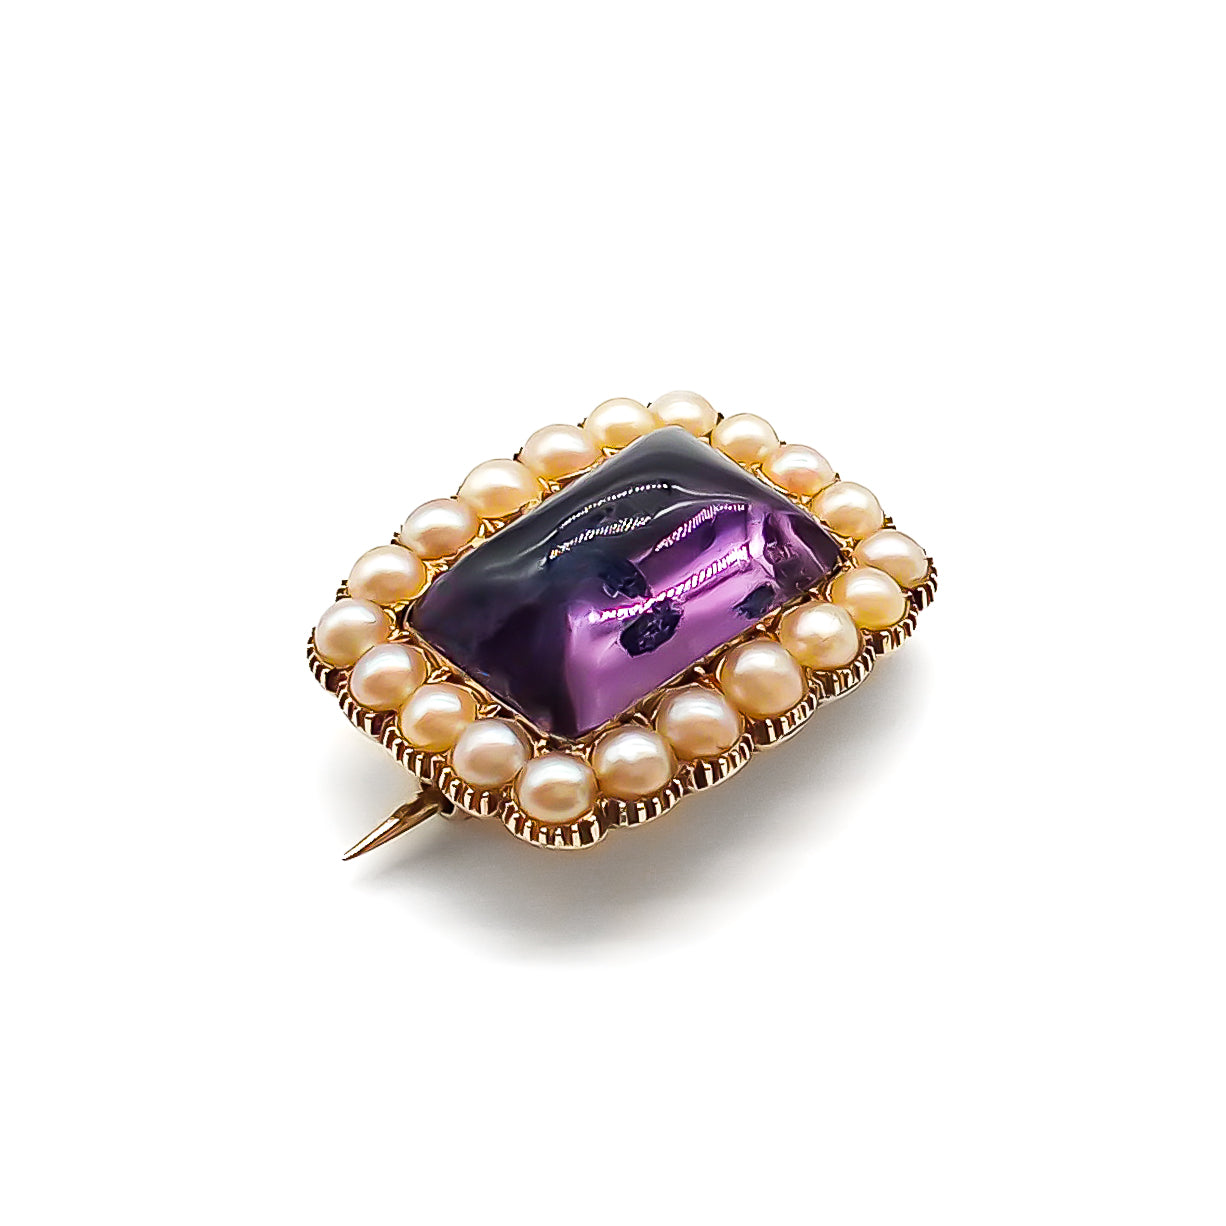 Lovely Georgian 15ct gold brooch set with a cabochon amethyst, surrounded by twenty lustrous seed pearls.